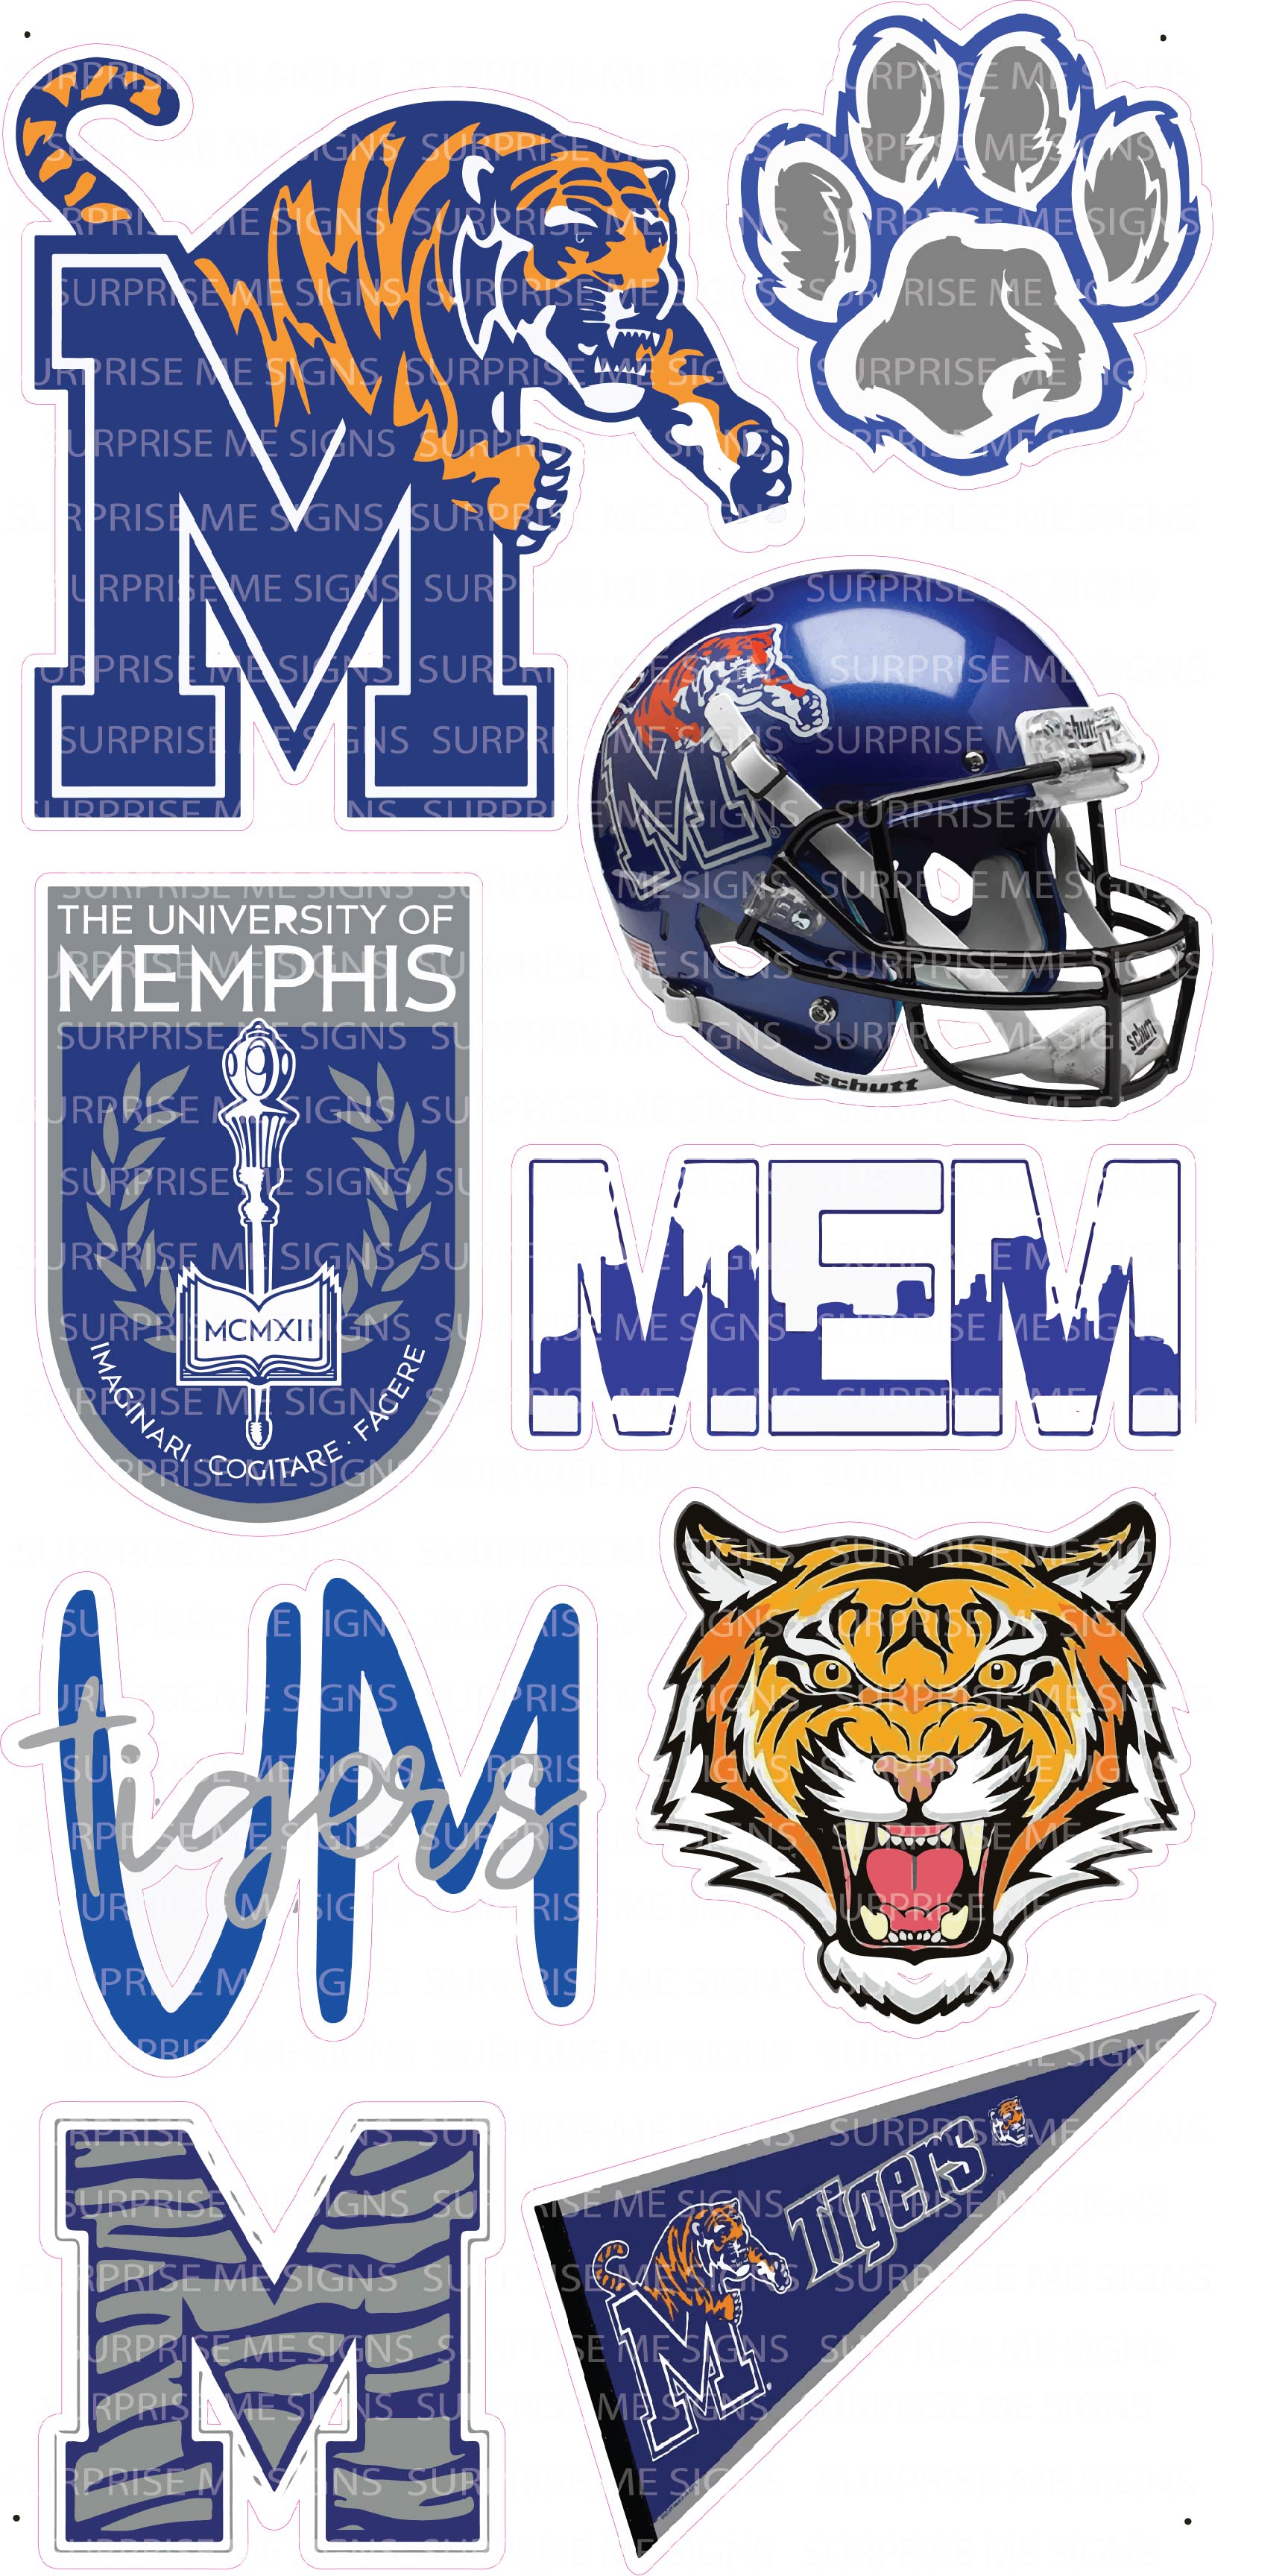  Memphis Tigers Basketball College Pennant Flag